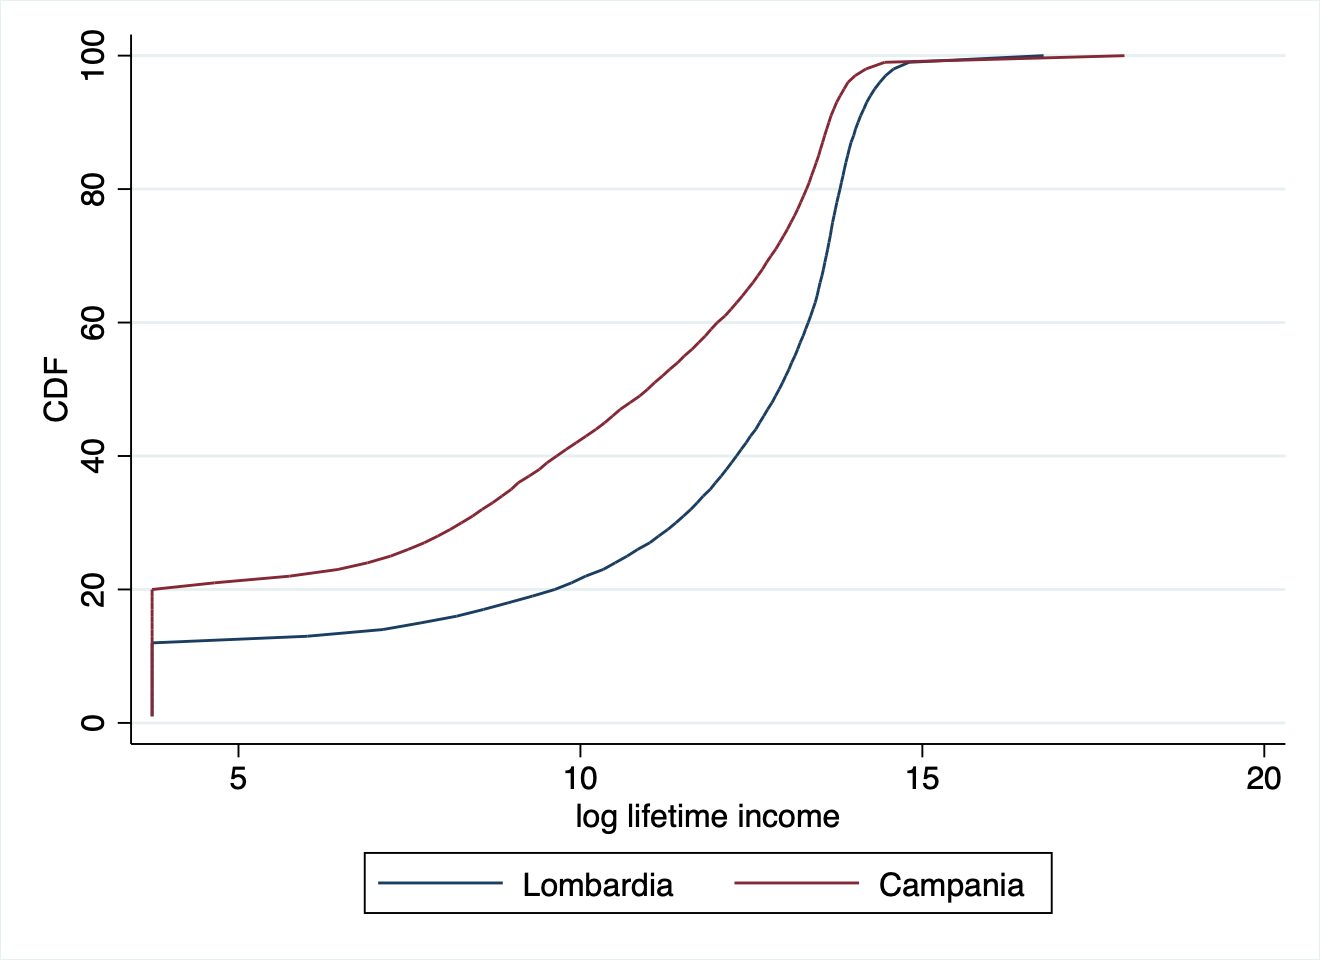 Figure 1 Cumulative distribution of lifetime income in Lombardy and Campania for individuals born in 1960